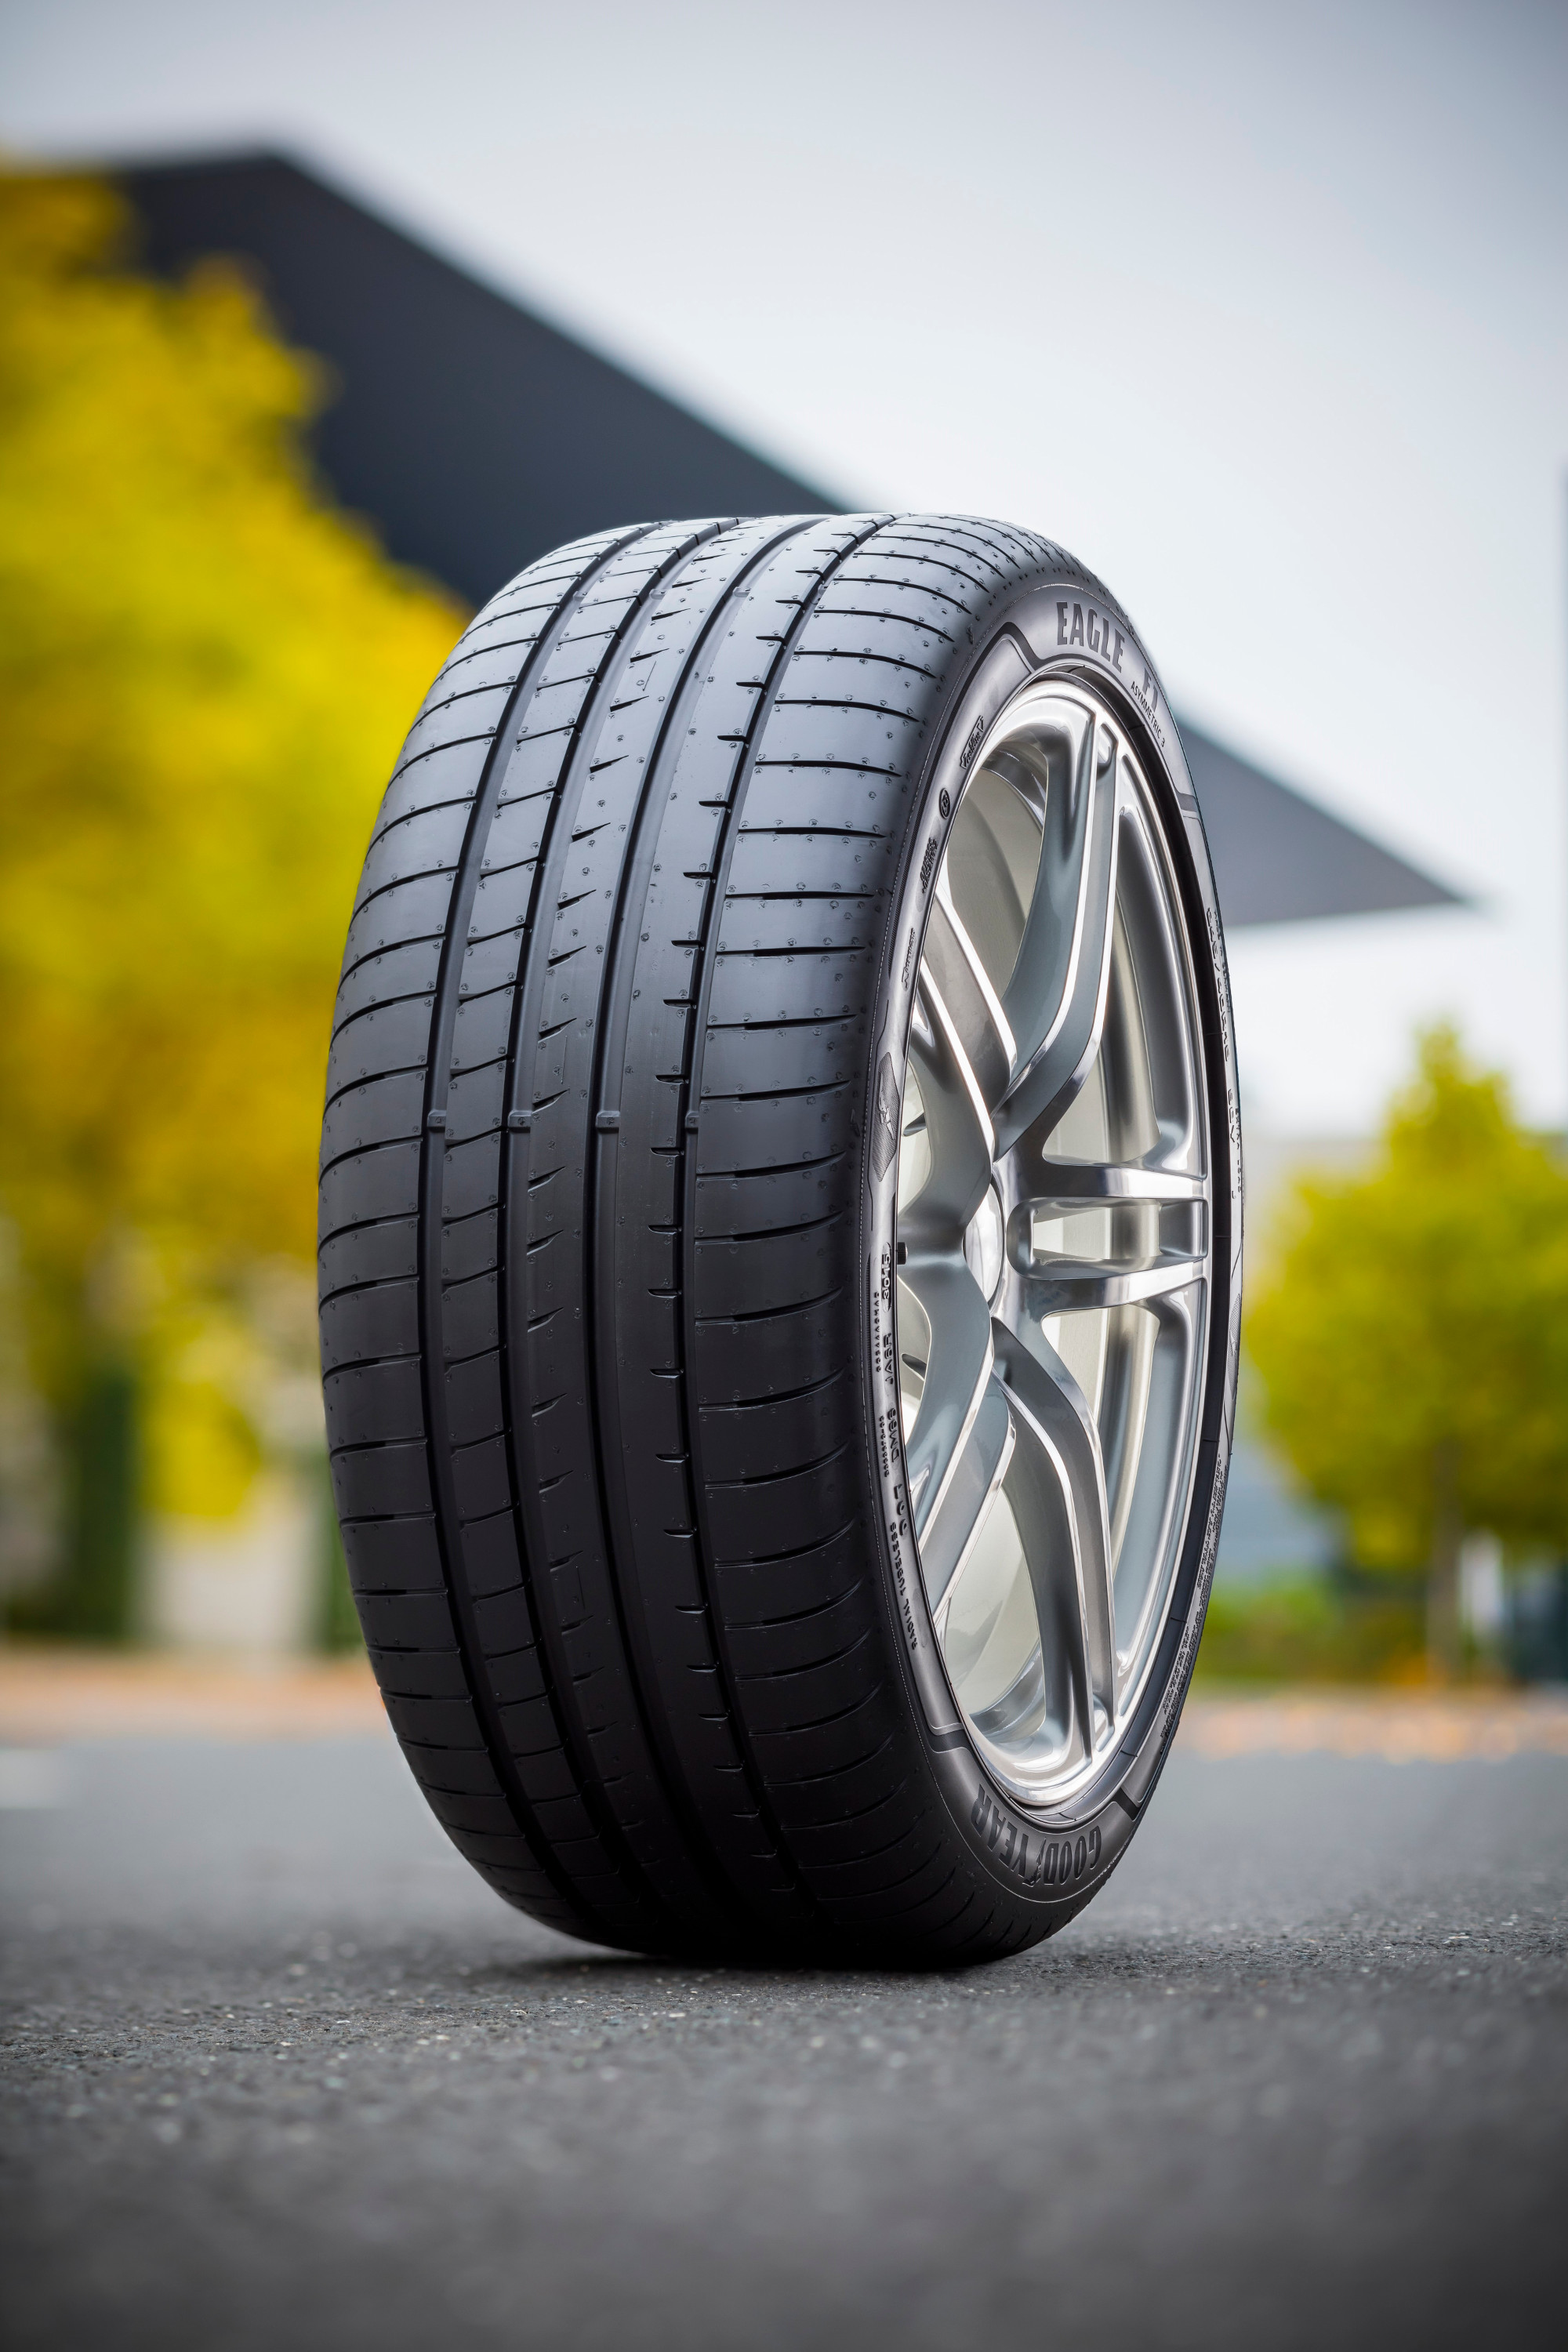 Goodyear’s new Eagle F1 Asymmetric 3 boasts strong improvements in mileage and braking